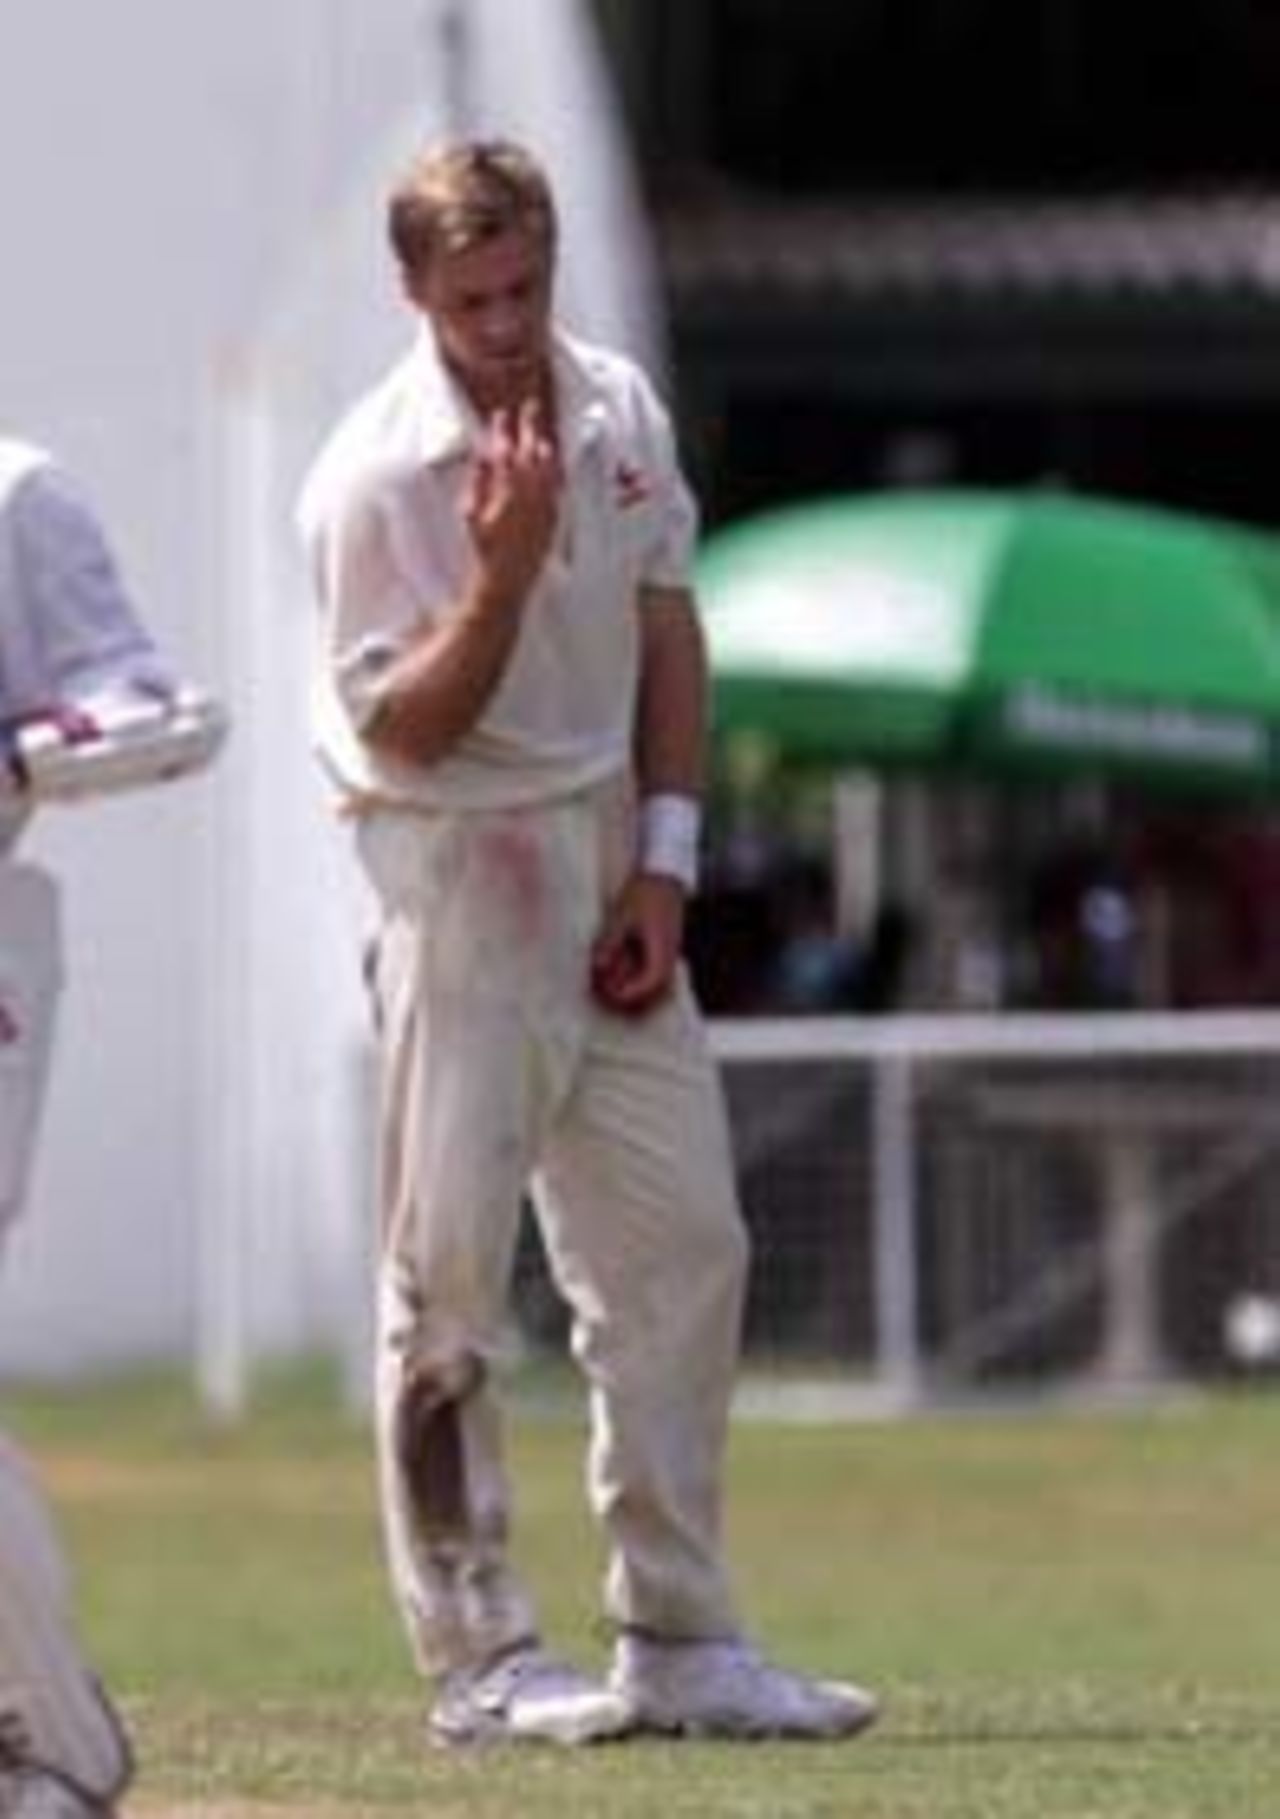 19 Sep 1999: Scott Muller of Australia, inspects his hand after splitting the webbing in his fingers, during day three of the Tour match between the Sri Lanka Board XI and Australia at Colombo Cricket Club, Colombo, Sri Lanka.